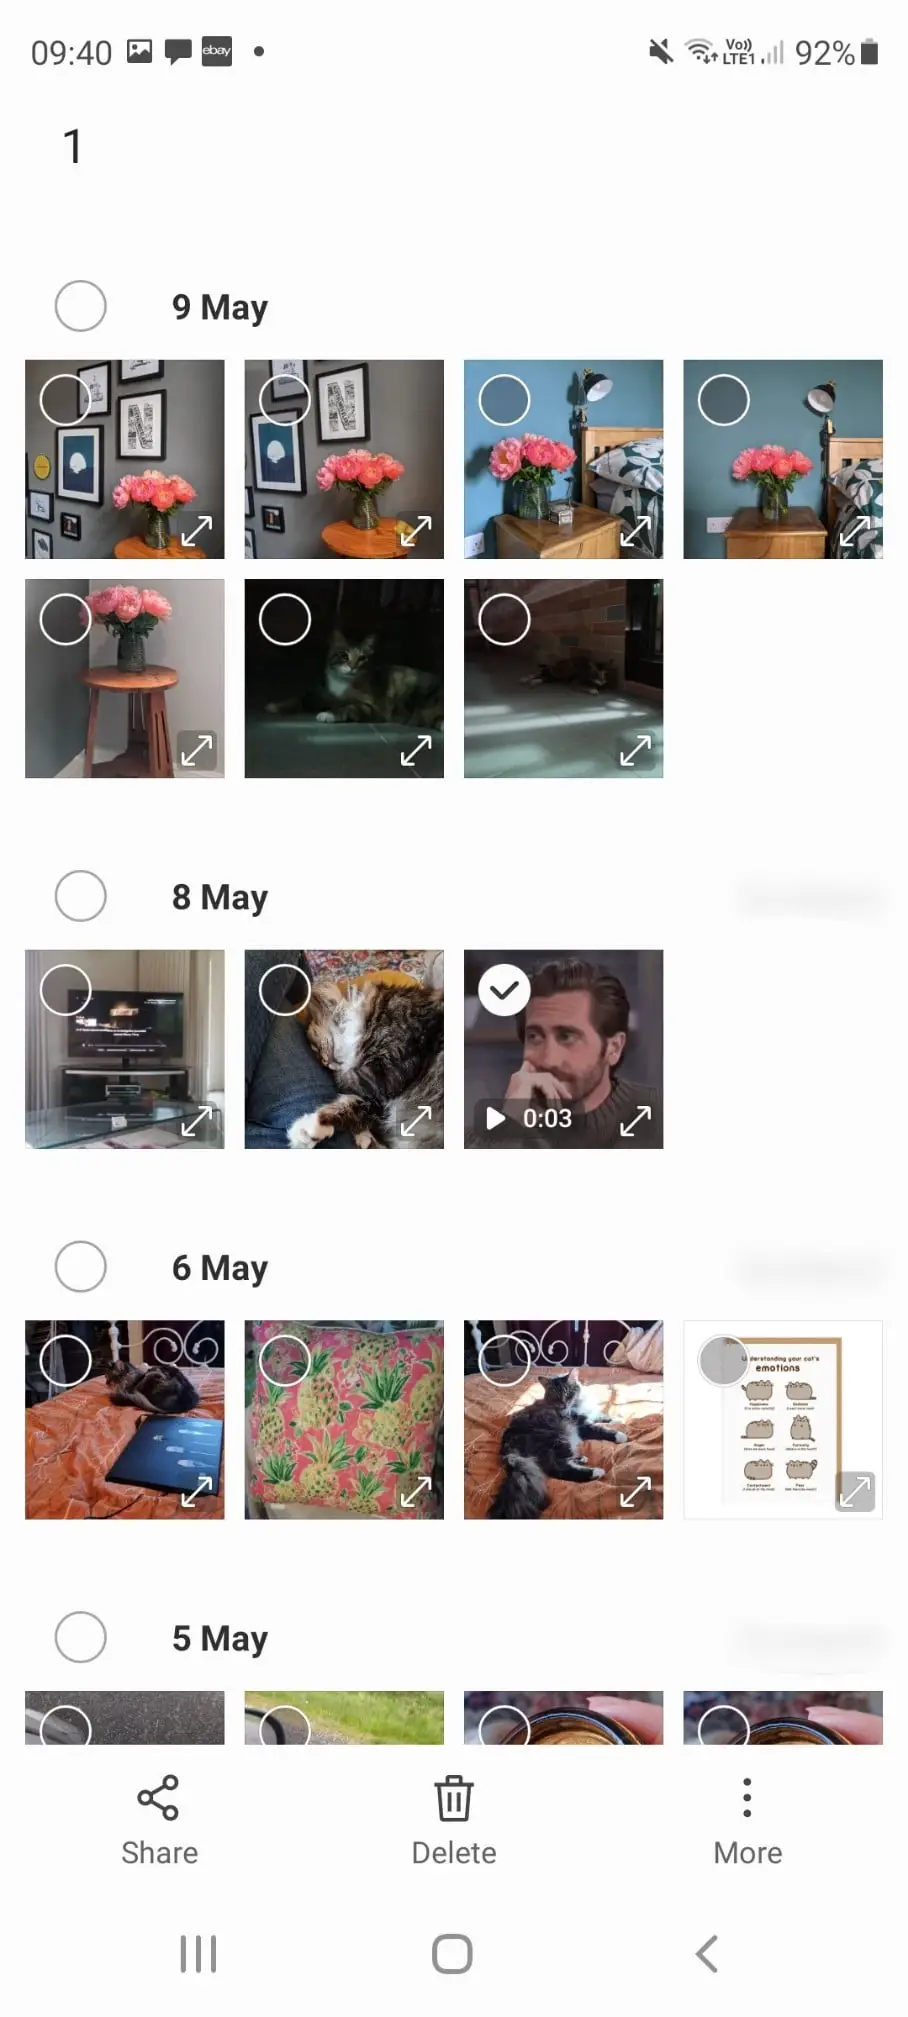 How to hide photos in android gallery?